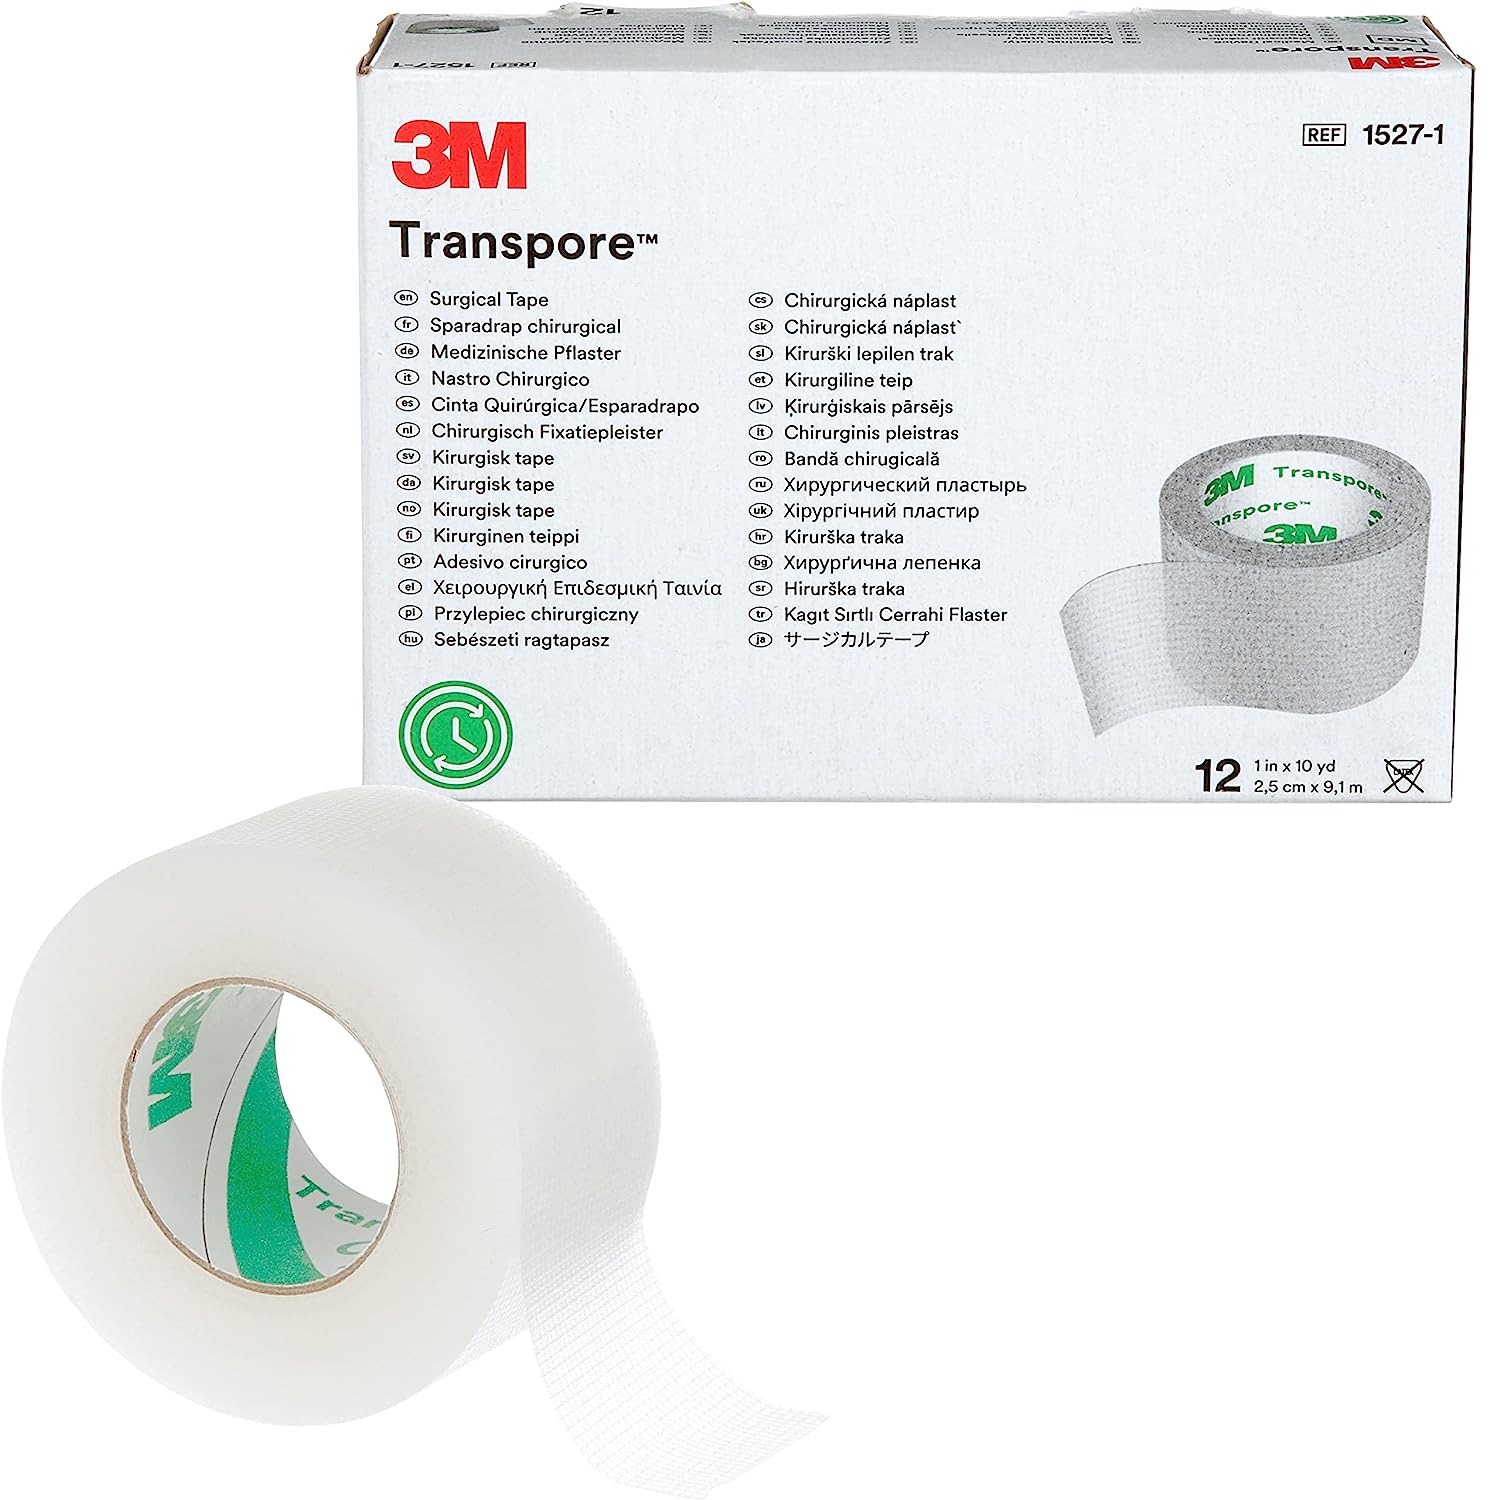 3M™ Transpore™ Surgical Tape 1527-1, 1 inch x 10 yard [...]